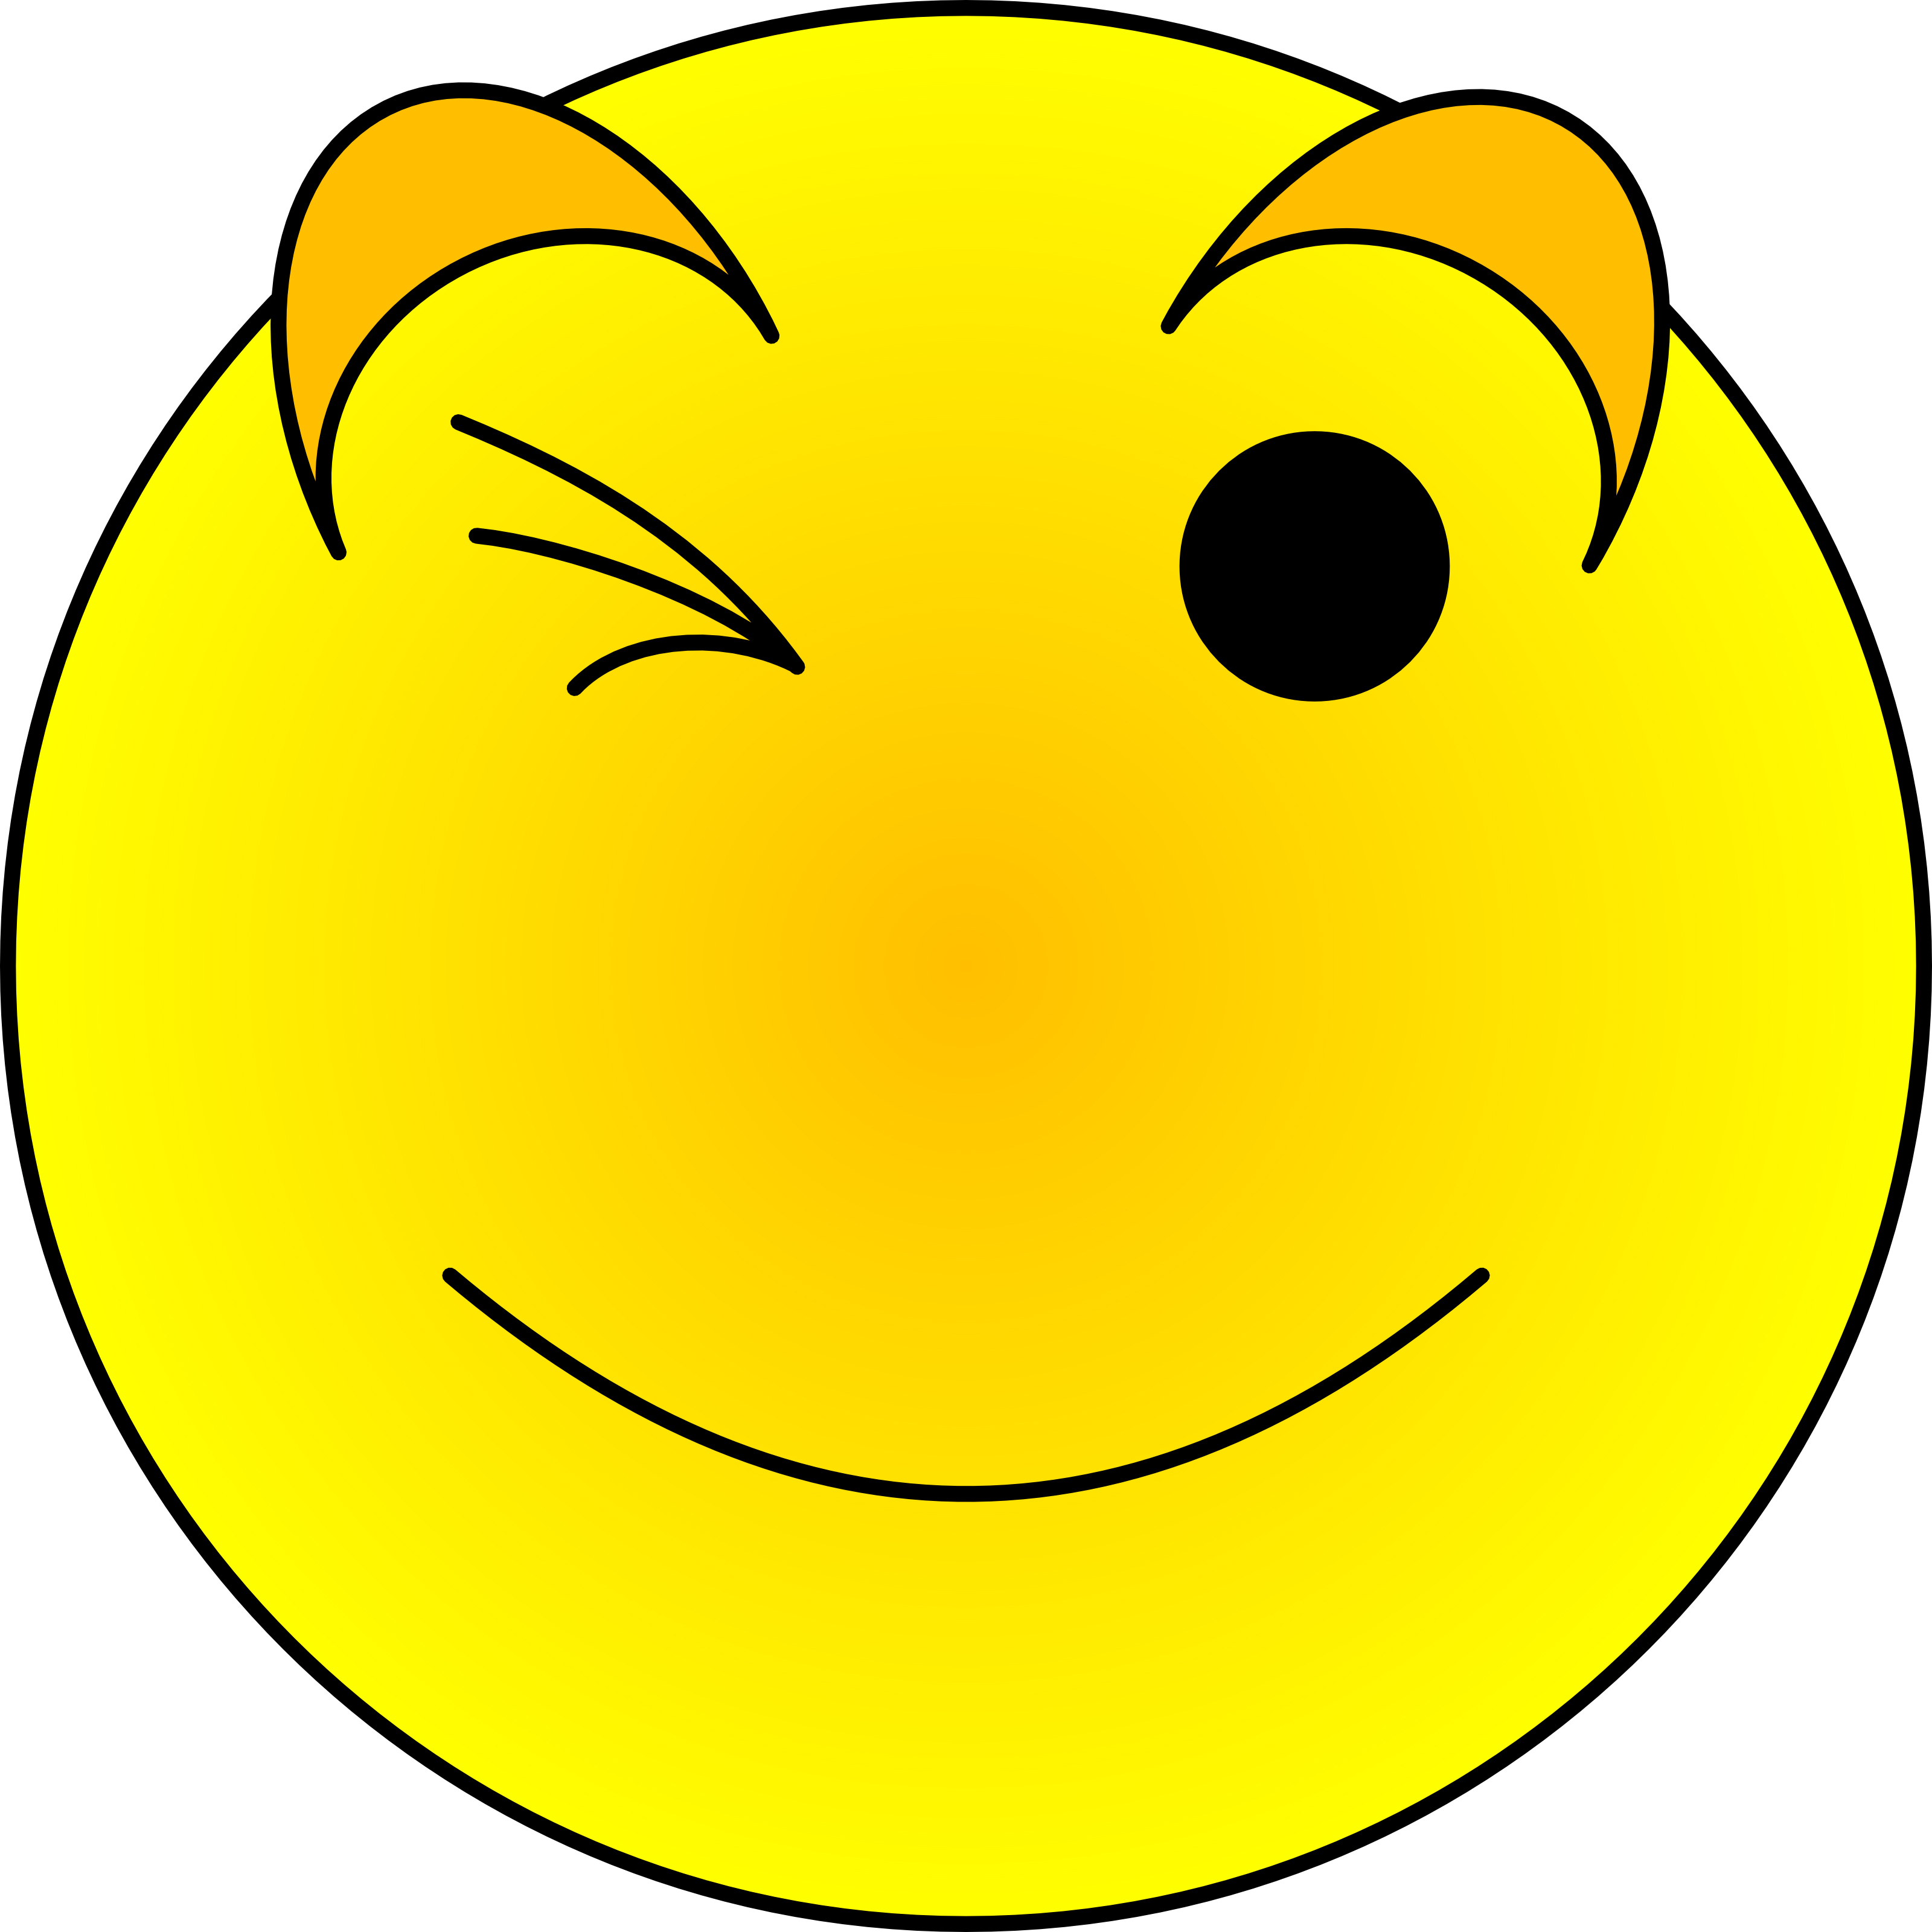 Winking Girl Smiley Face - ClipArt Best